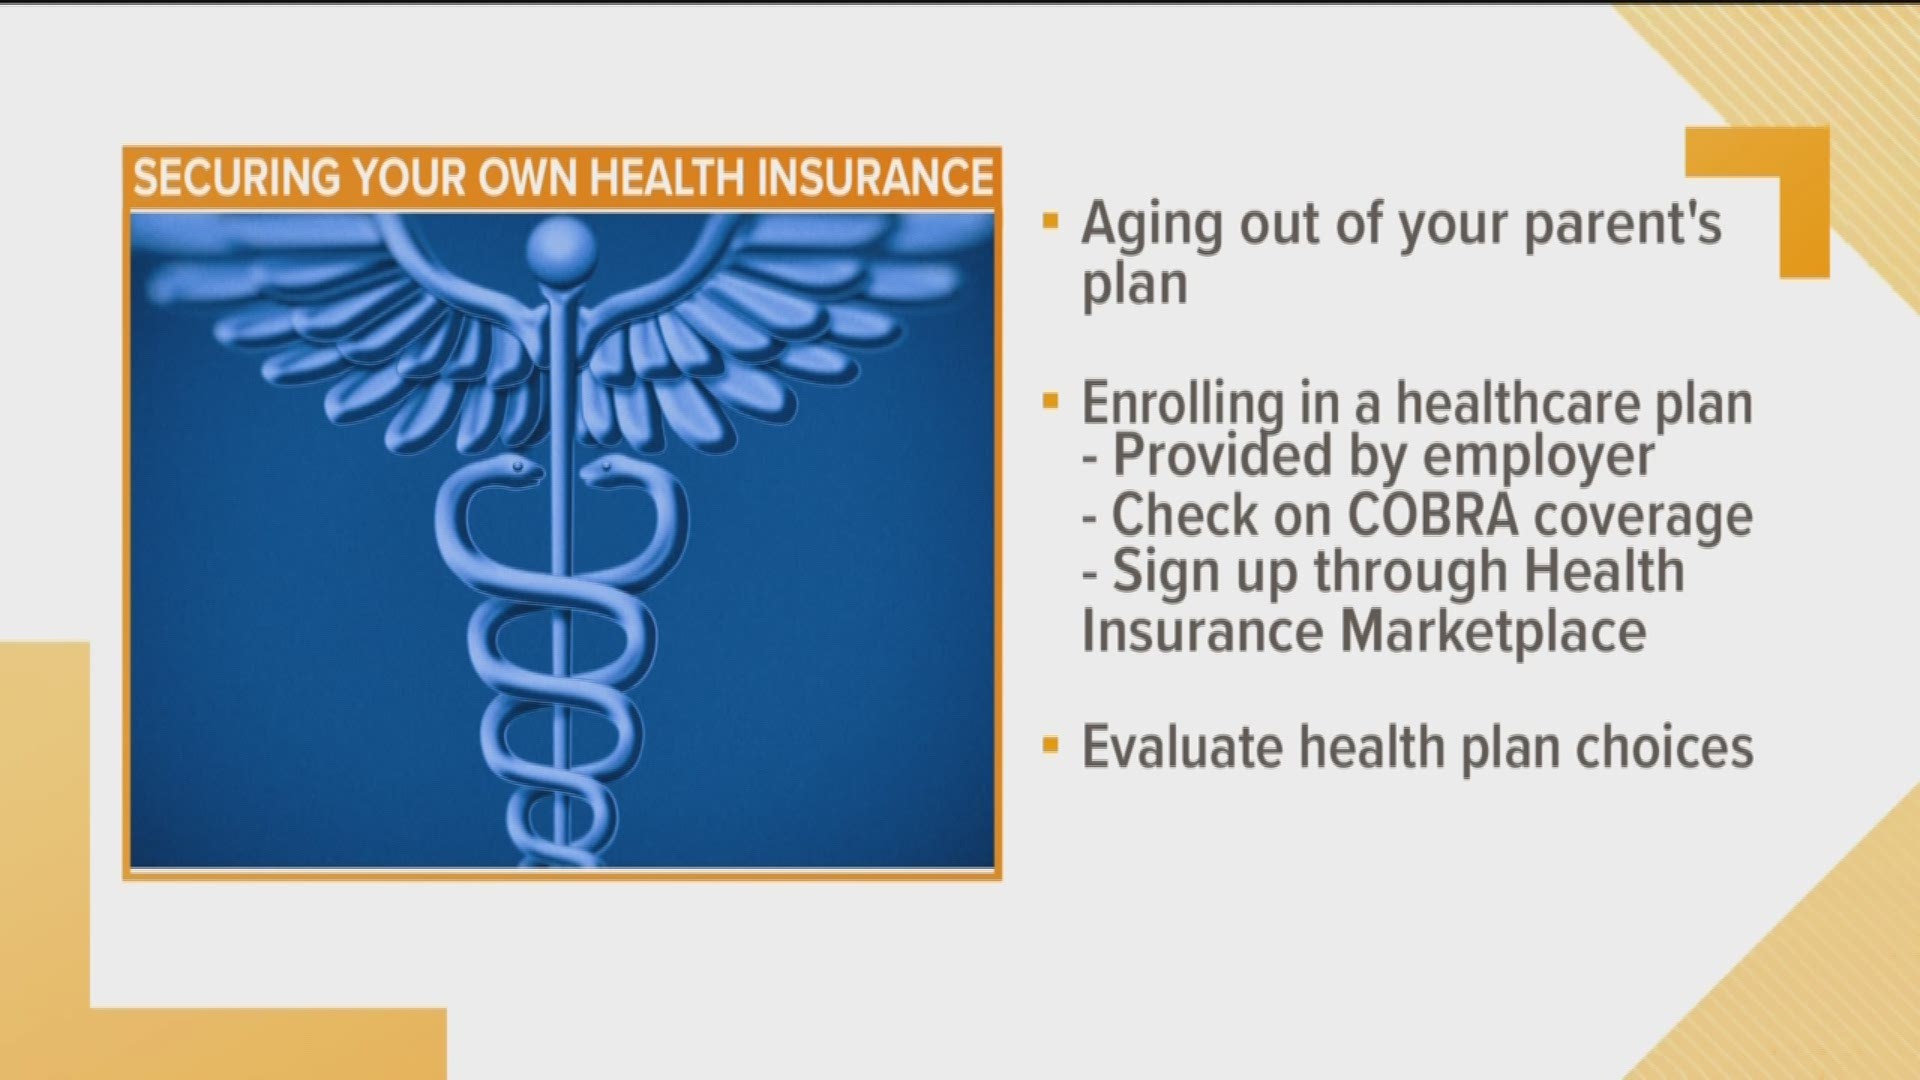 It might seem overwhelming, but if you take the time to assess your needs and understand your options, signing up for your own health care plan can be easy. https://kare11.tv/2NQeRuu